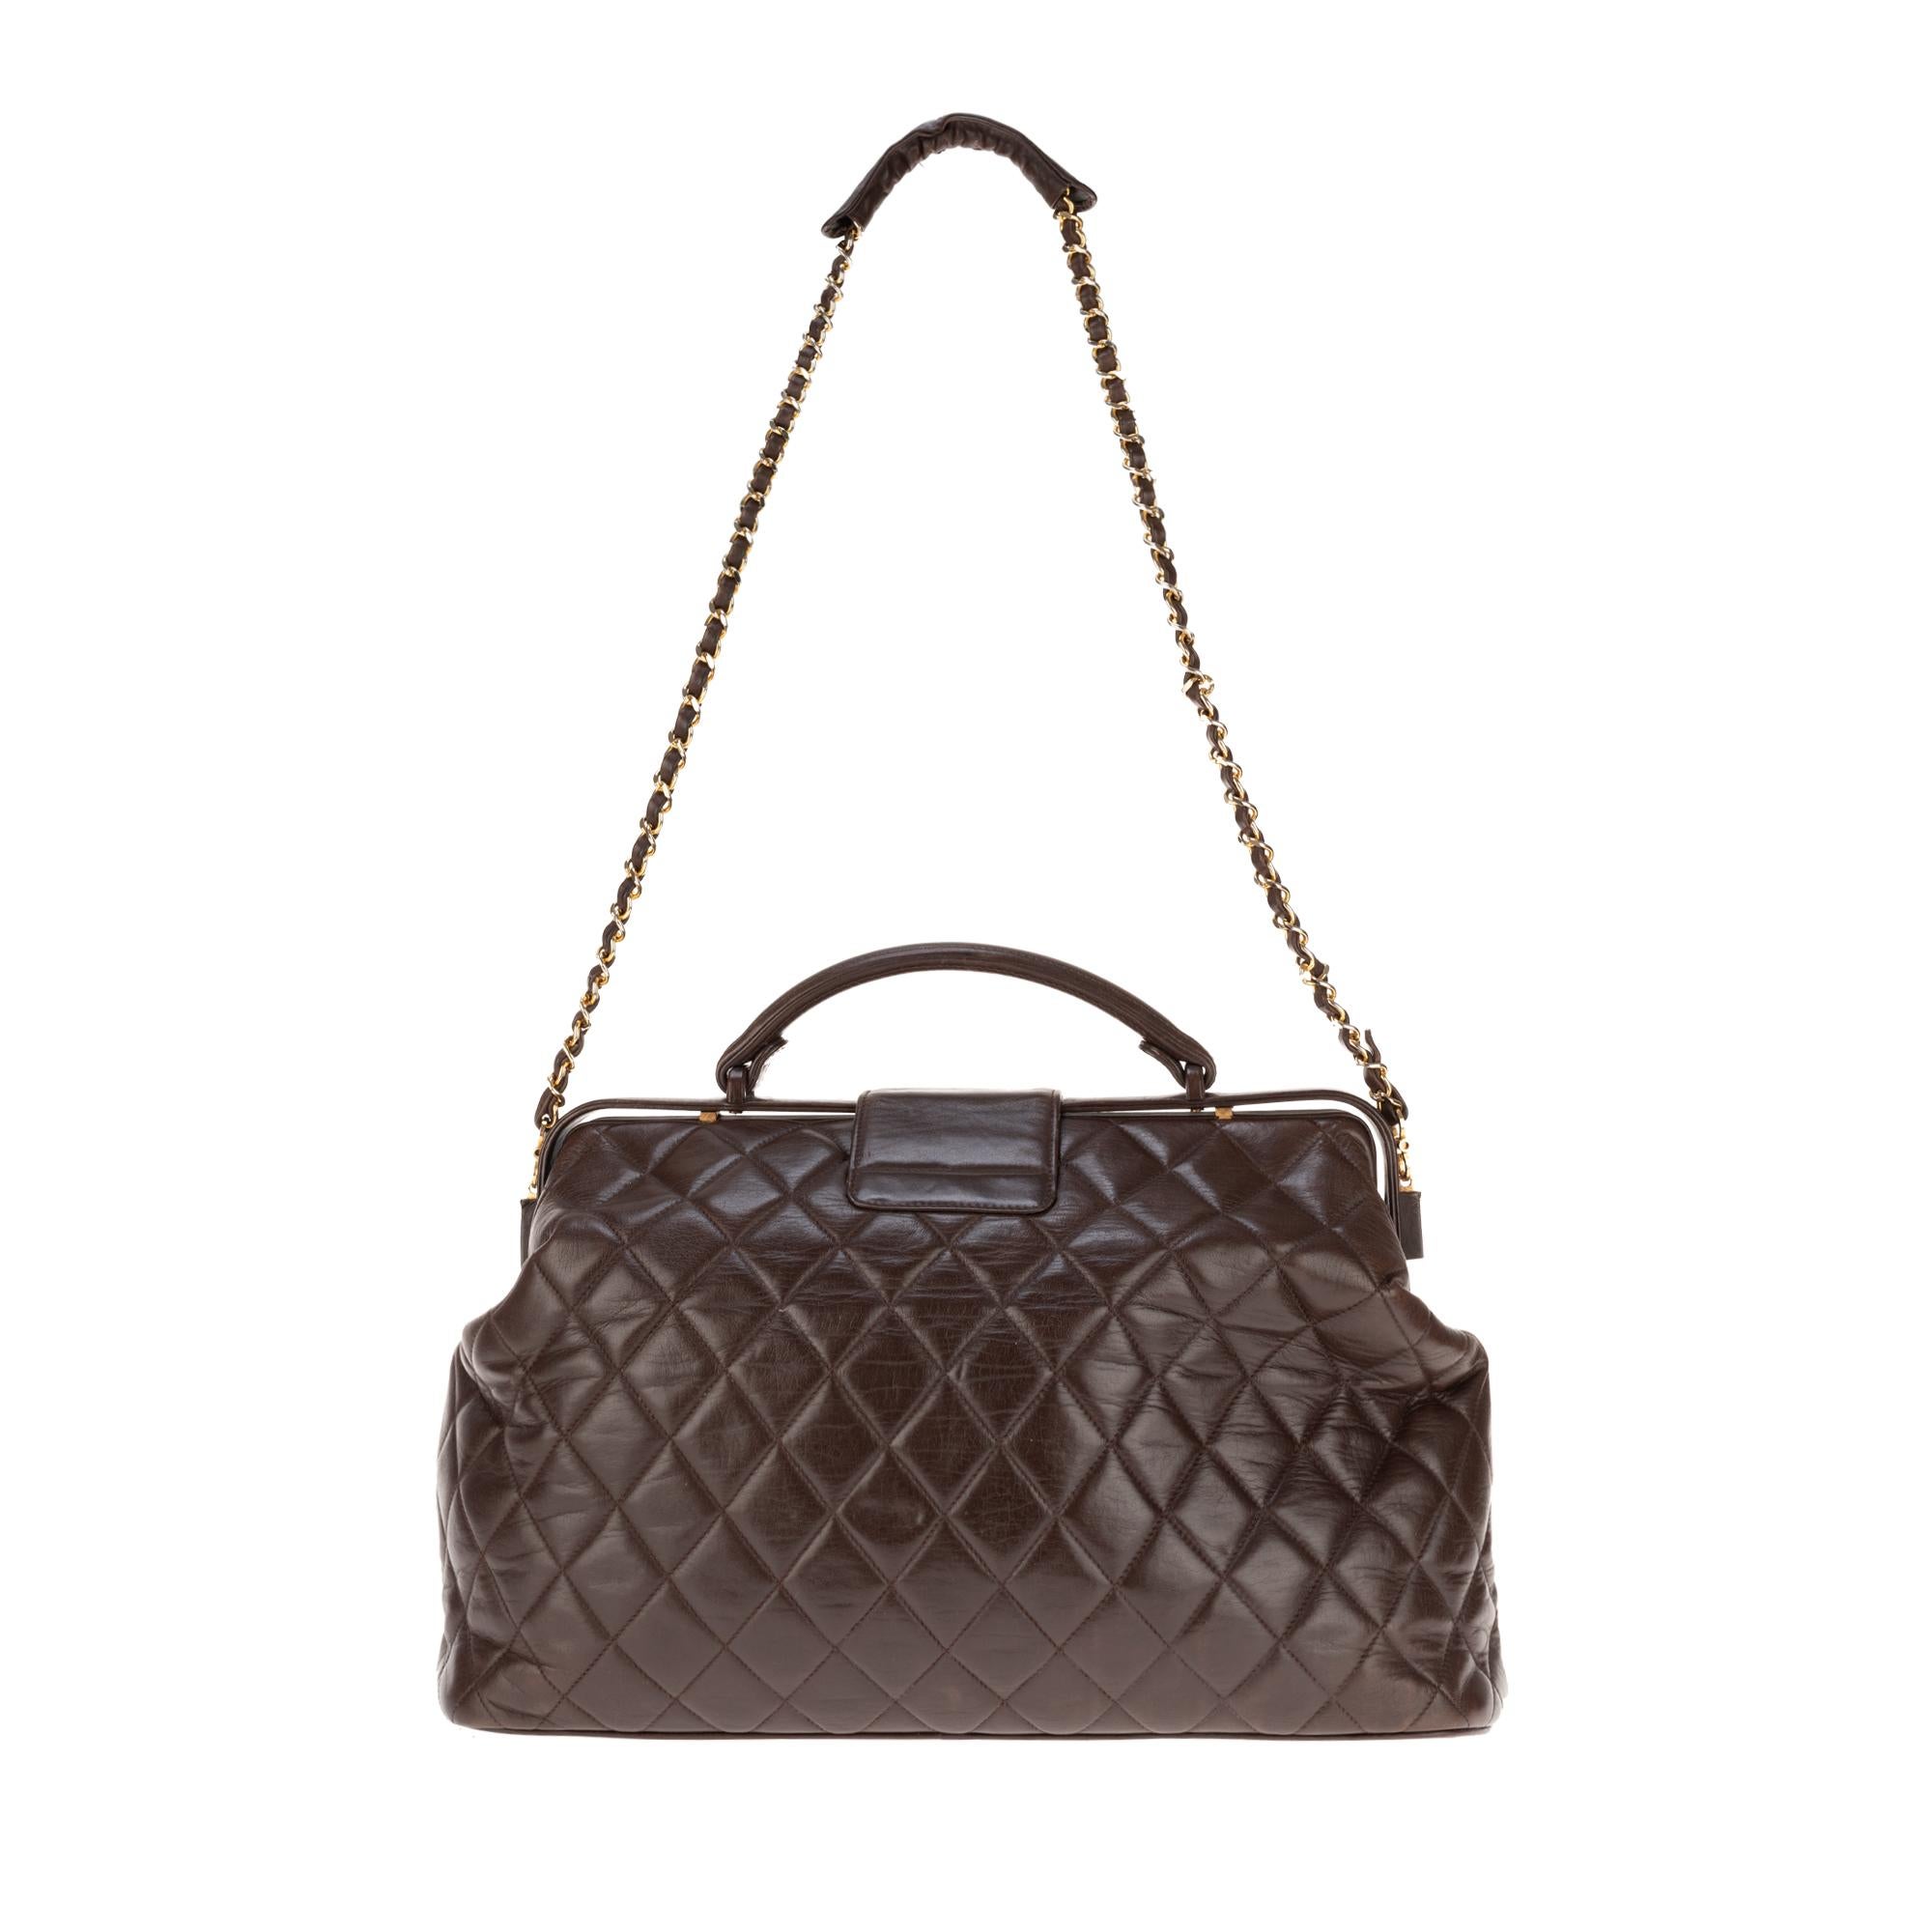 Chanel briefcase style bag in brown quilted lambskin leather, carried by central handle in brown leather or shoulder-worn with gold chain handle intertwined with brown lambskin leather.
Closure by small flap sigled gold CC and turnstile.
Opening by